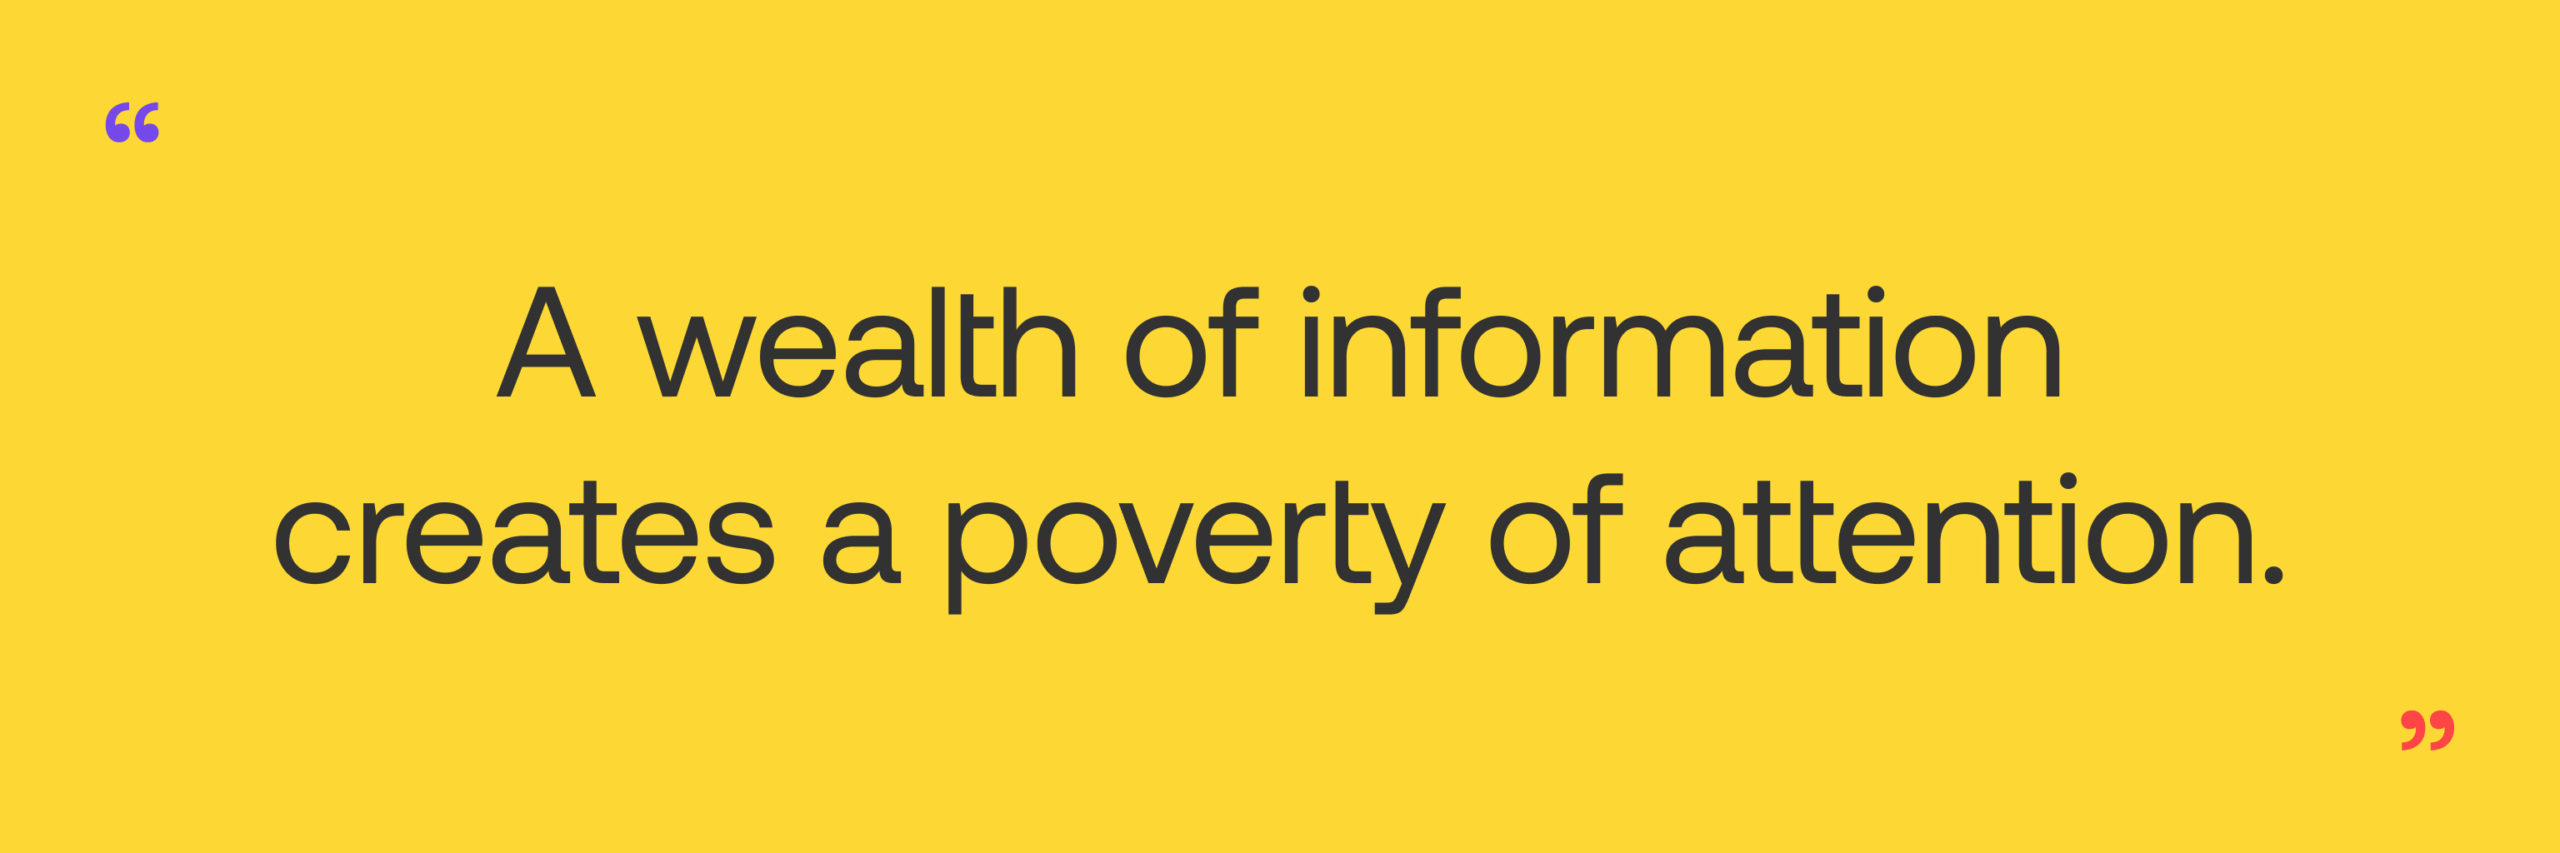 herbert simon quote wealth of information creates poverty of attention